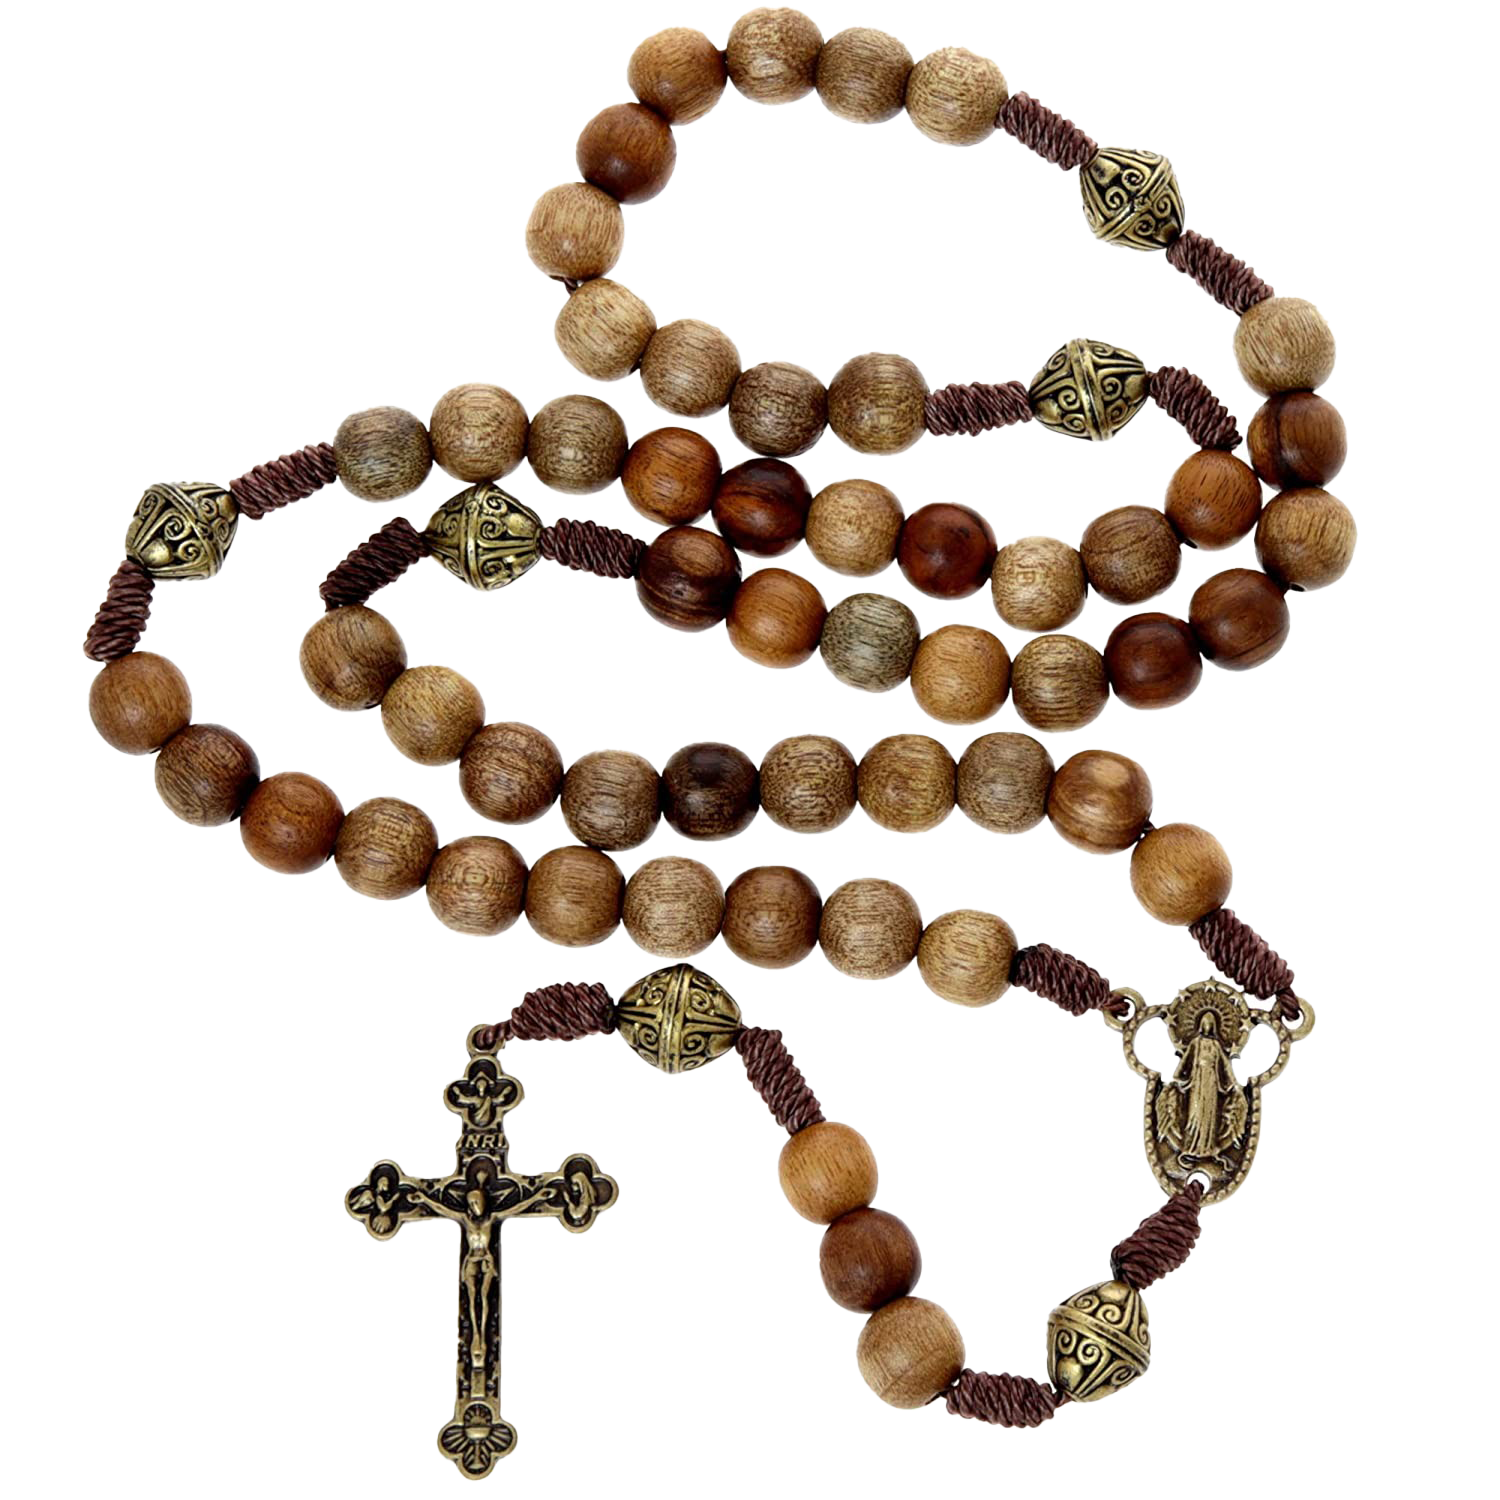 Rosary Beads PNG Image